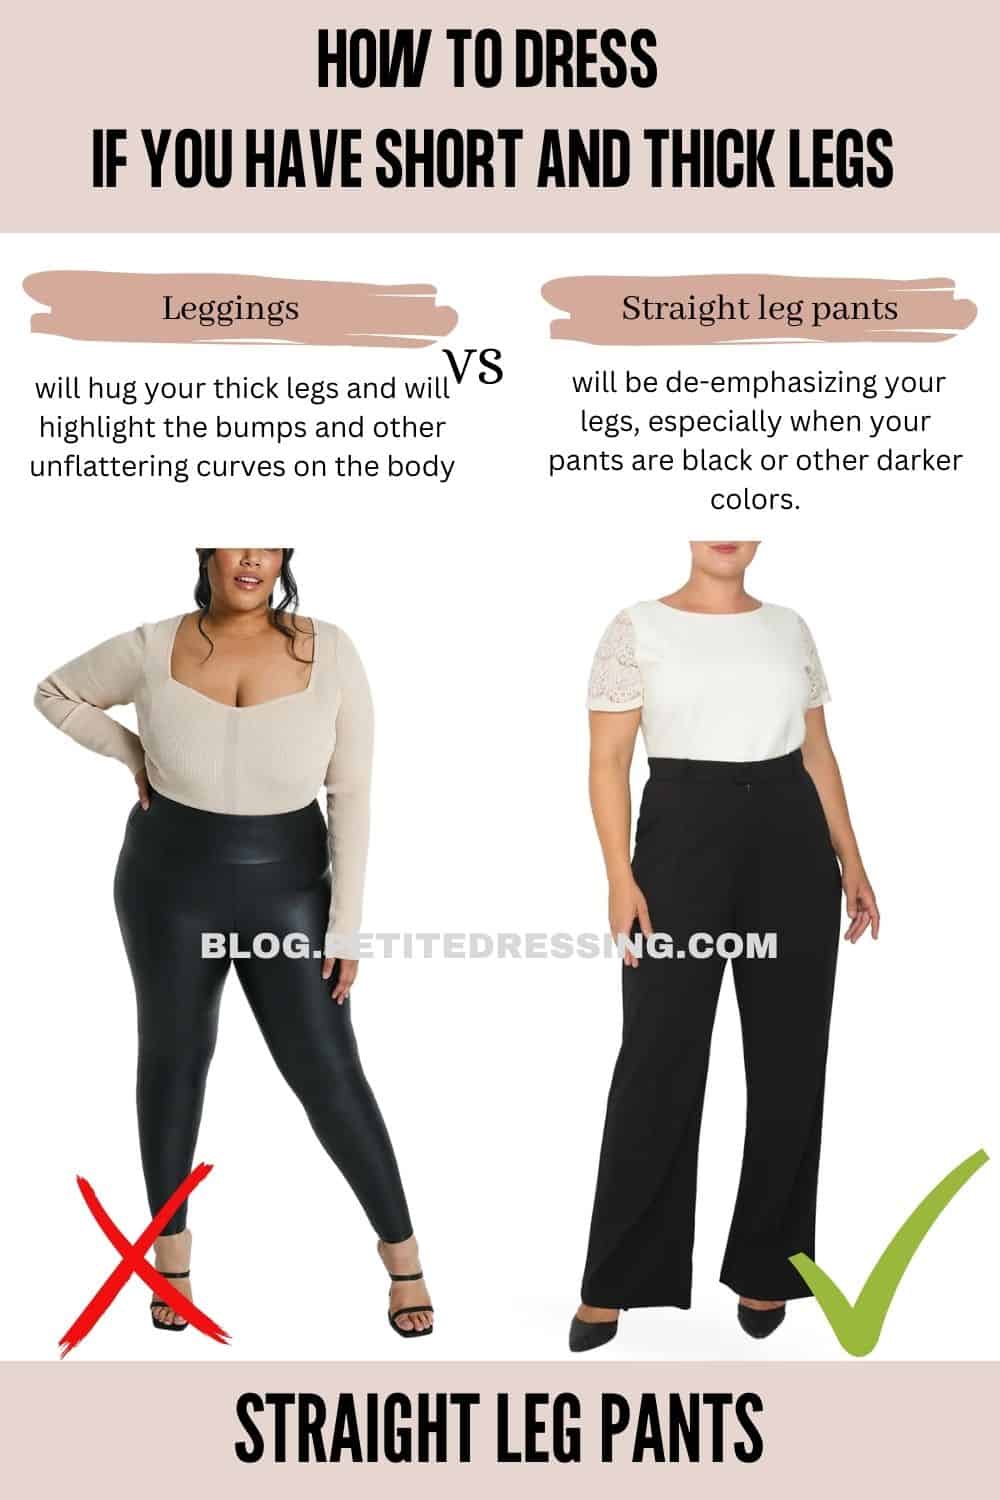 Short Thick Legs Porn - Got Short and Thick Legs? This is What you should Wear and Avoid